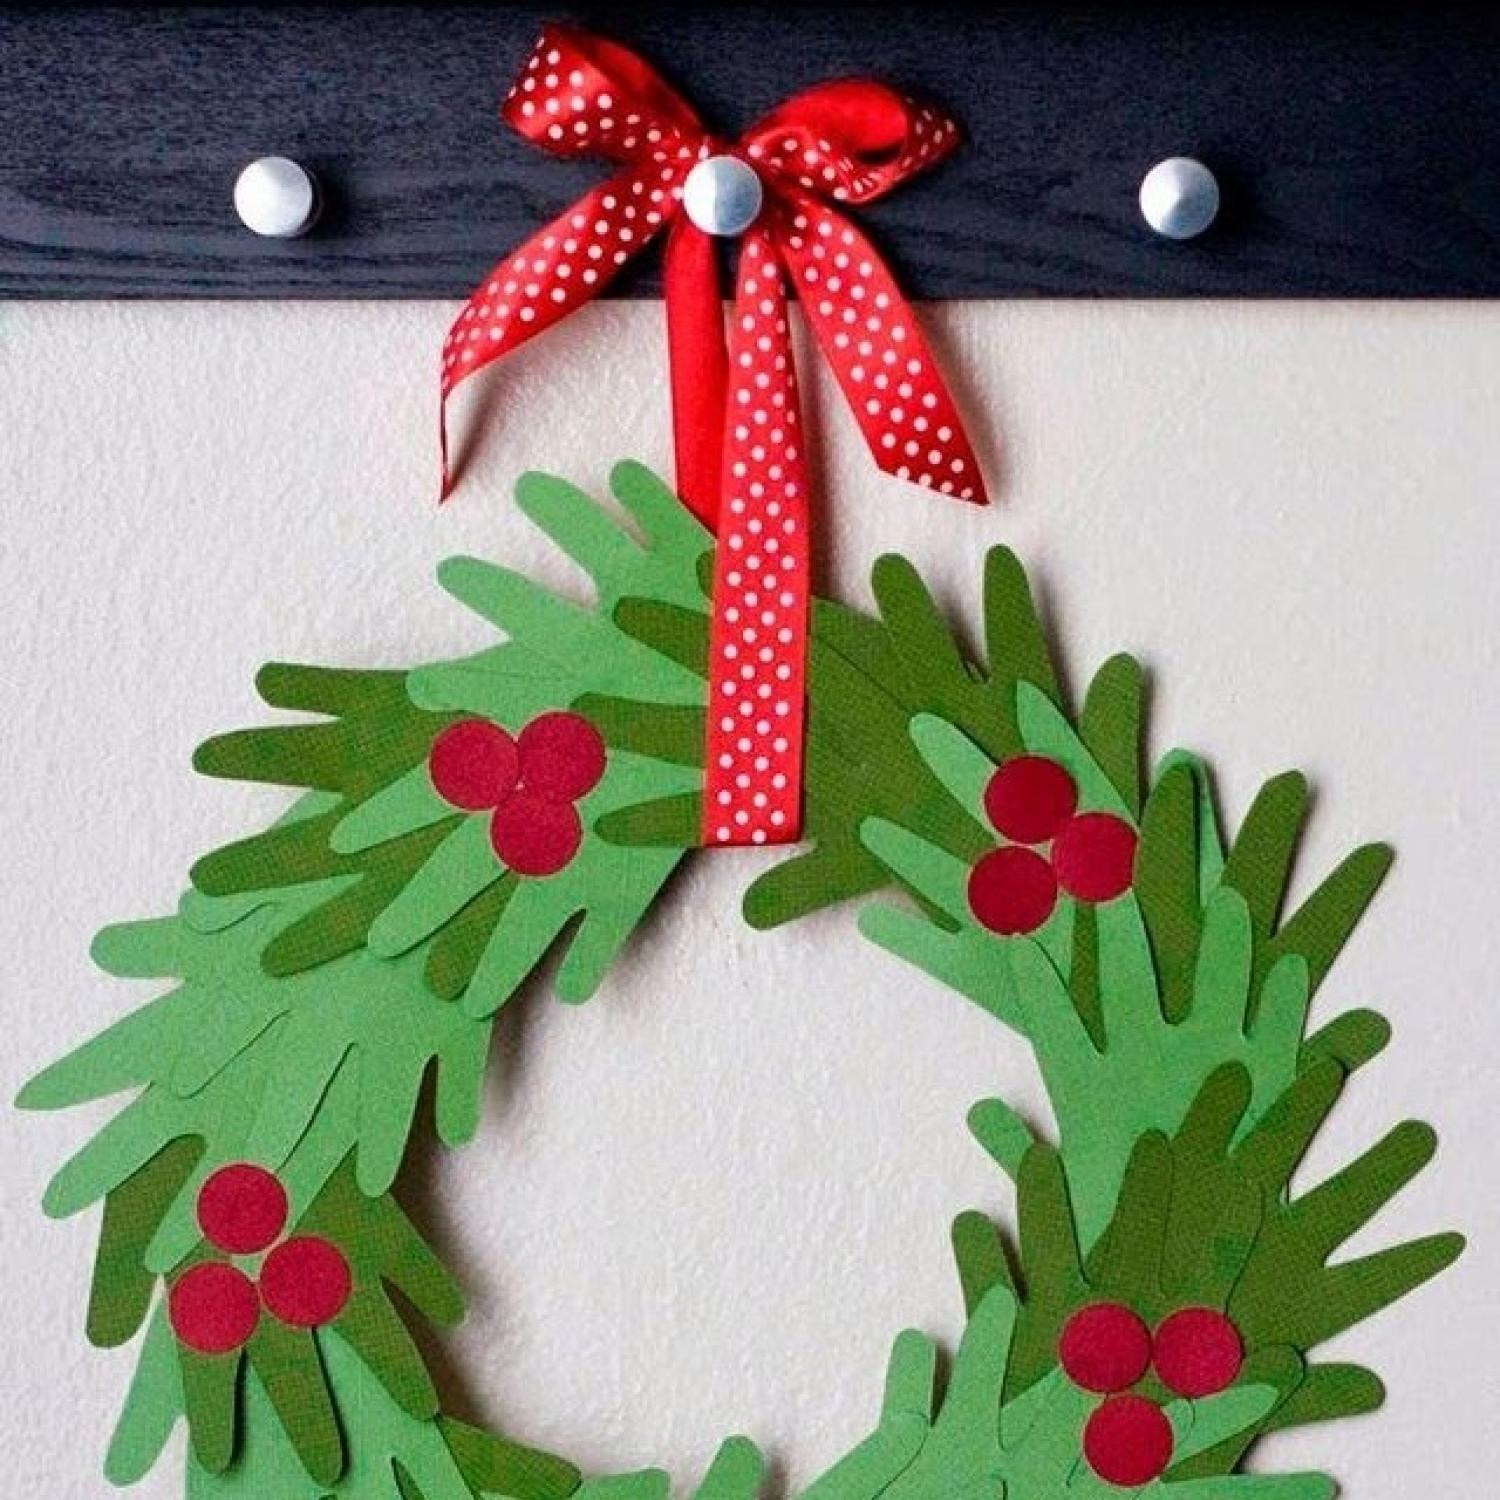 Christmas Crafts To Do With Toddlers
 10 Handprint Christmas Crafts for Kids